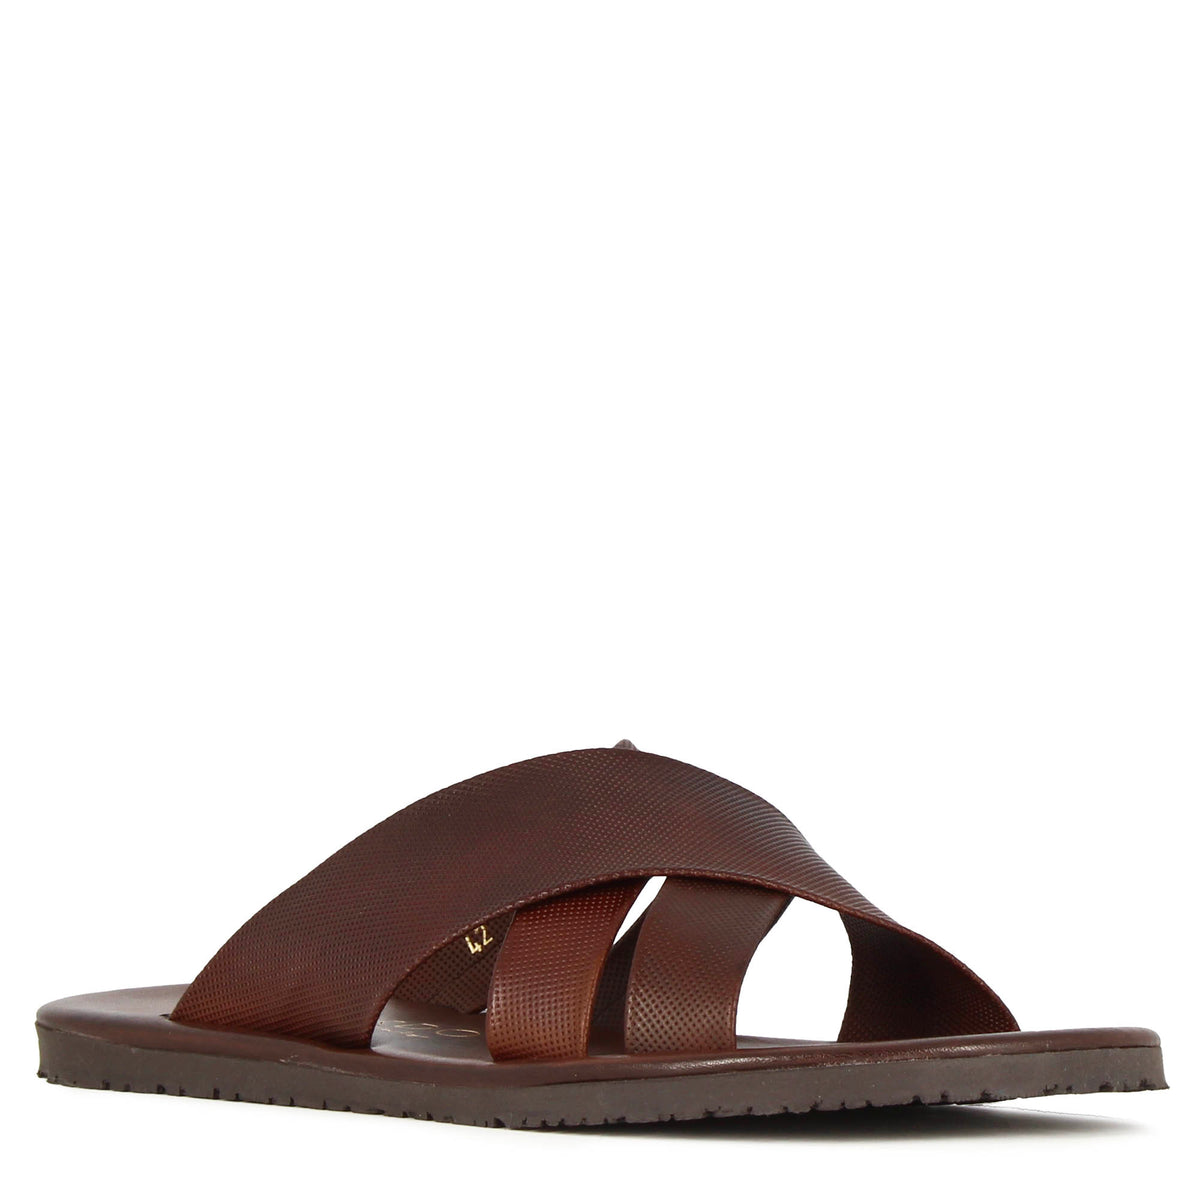 Men's slipper sandal with handmade brown leather bands